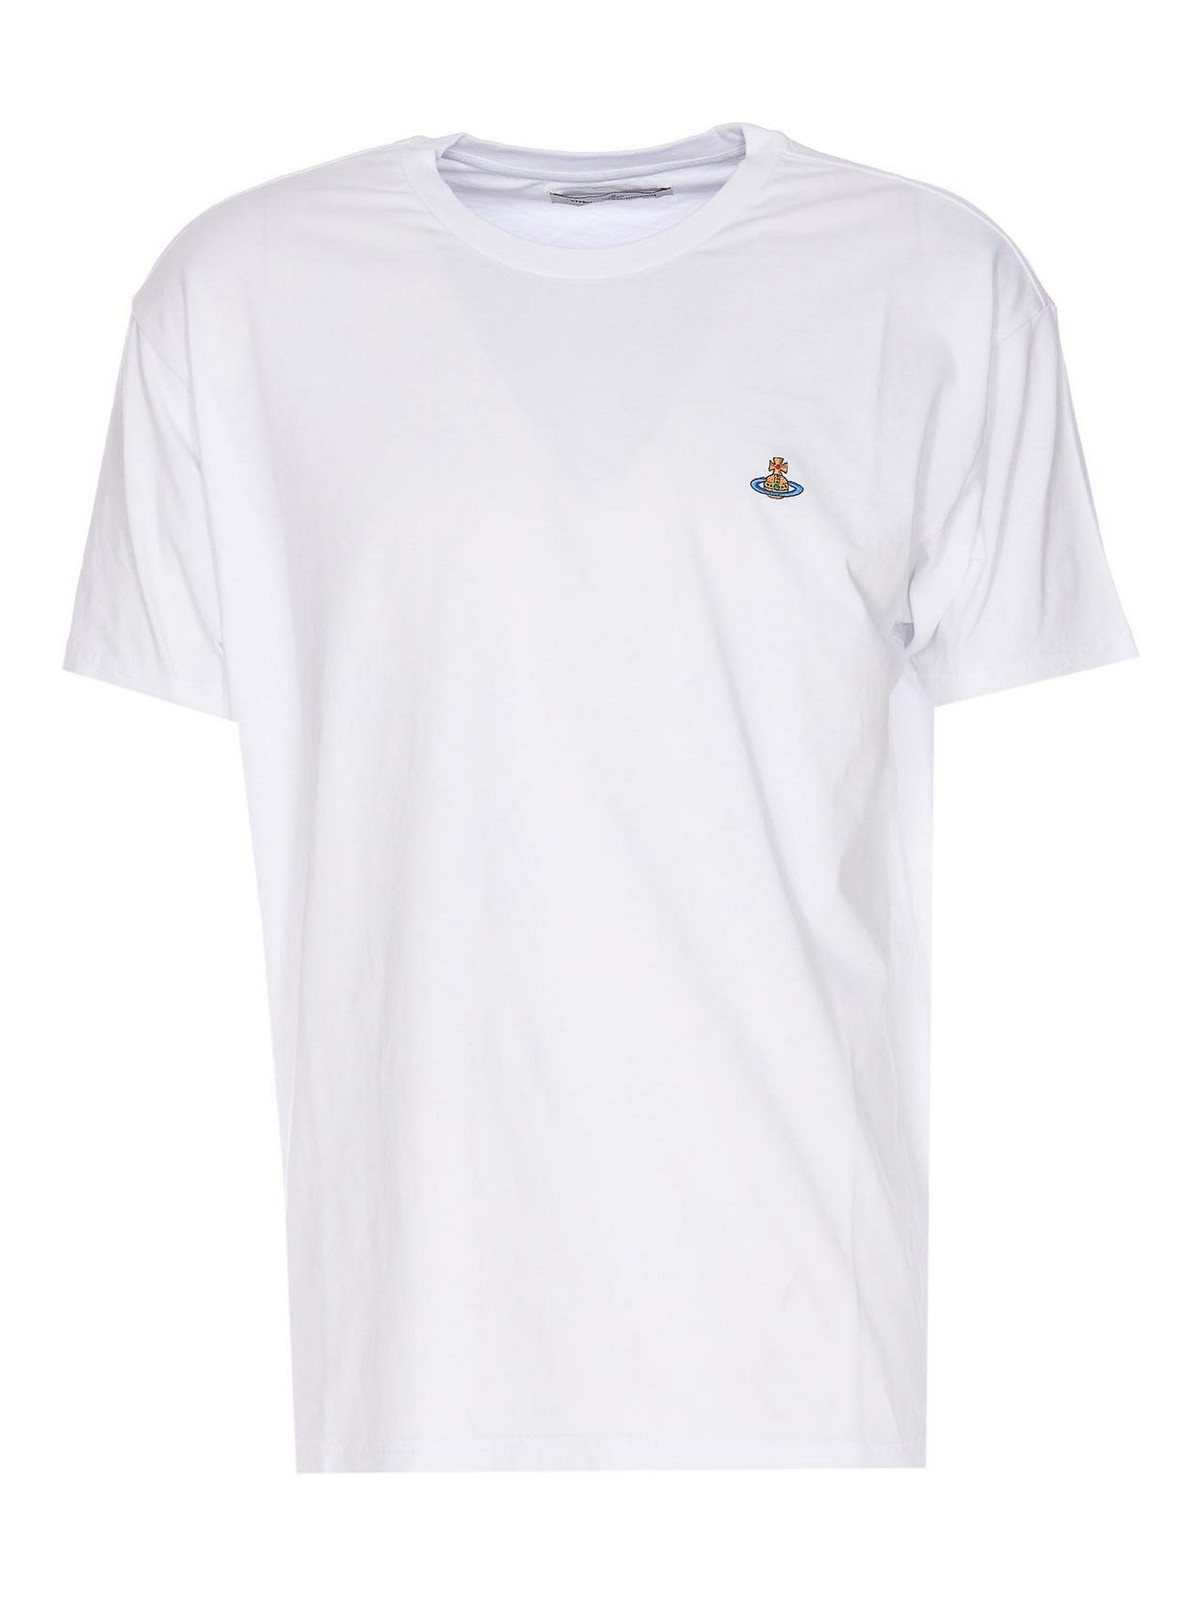 Vivienne Westwood Orb T-shirt In White